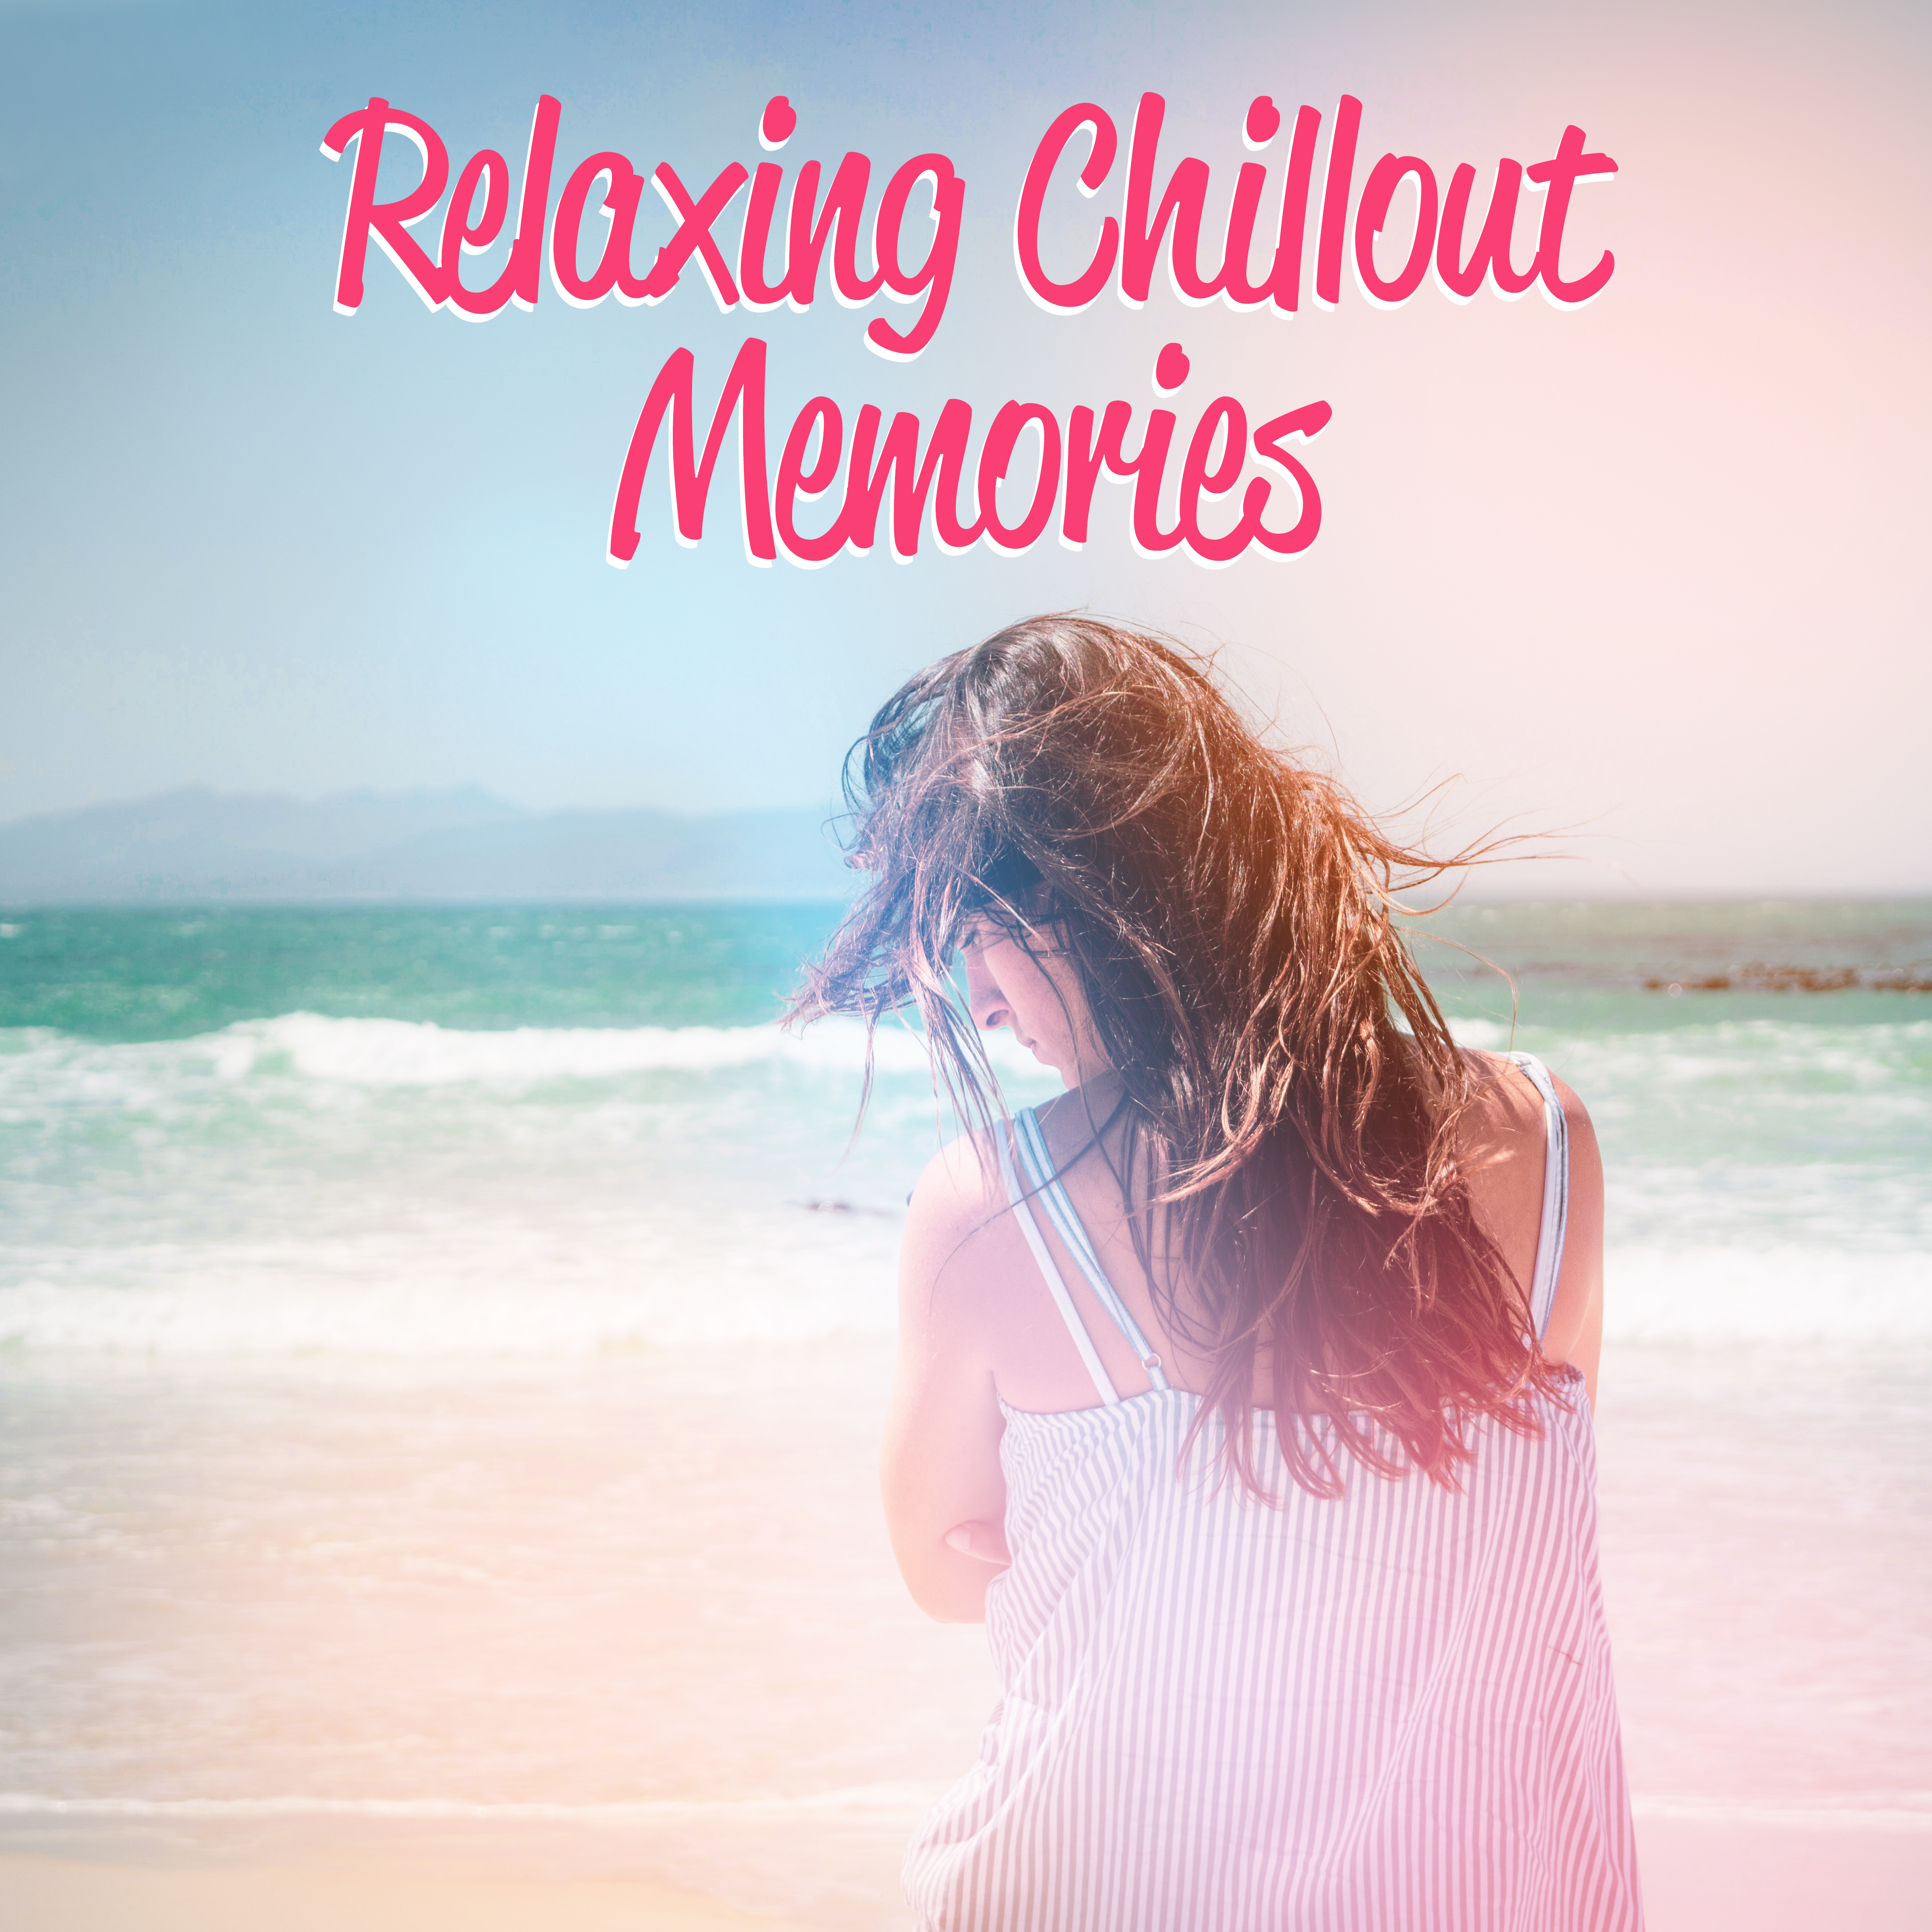 Relaxing Chillout Memories 2018